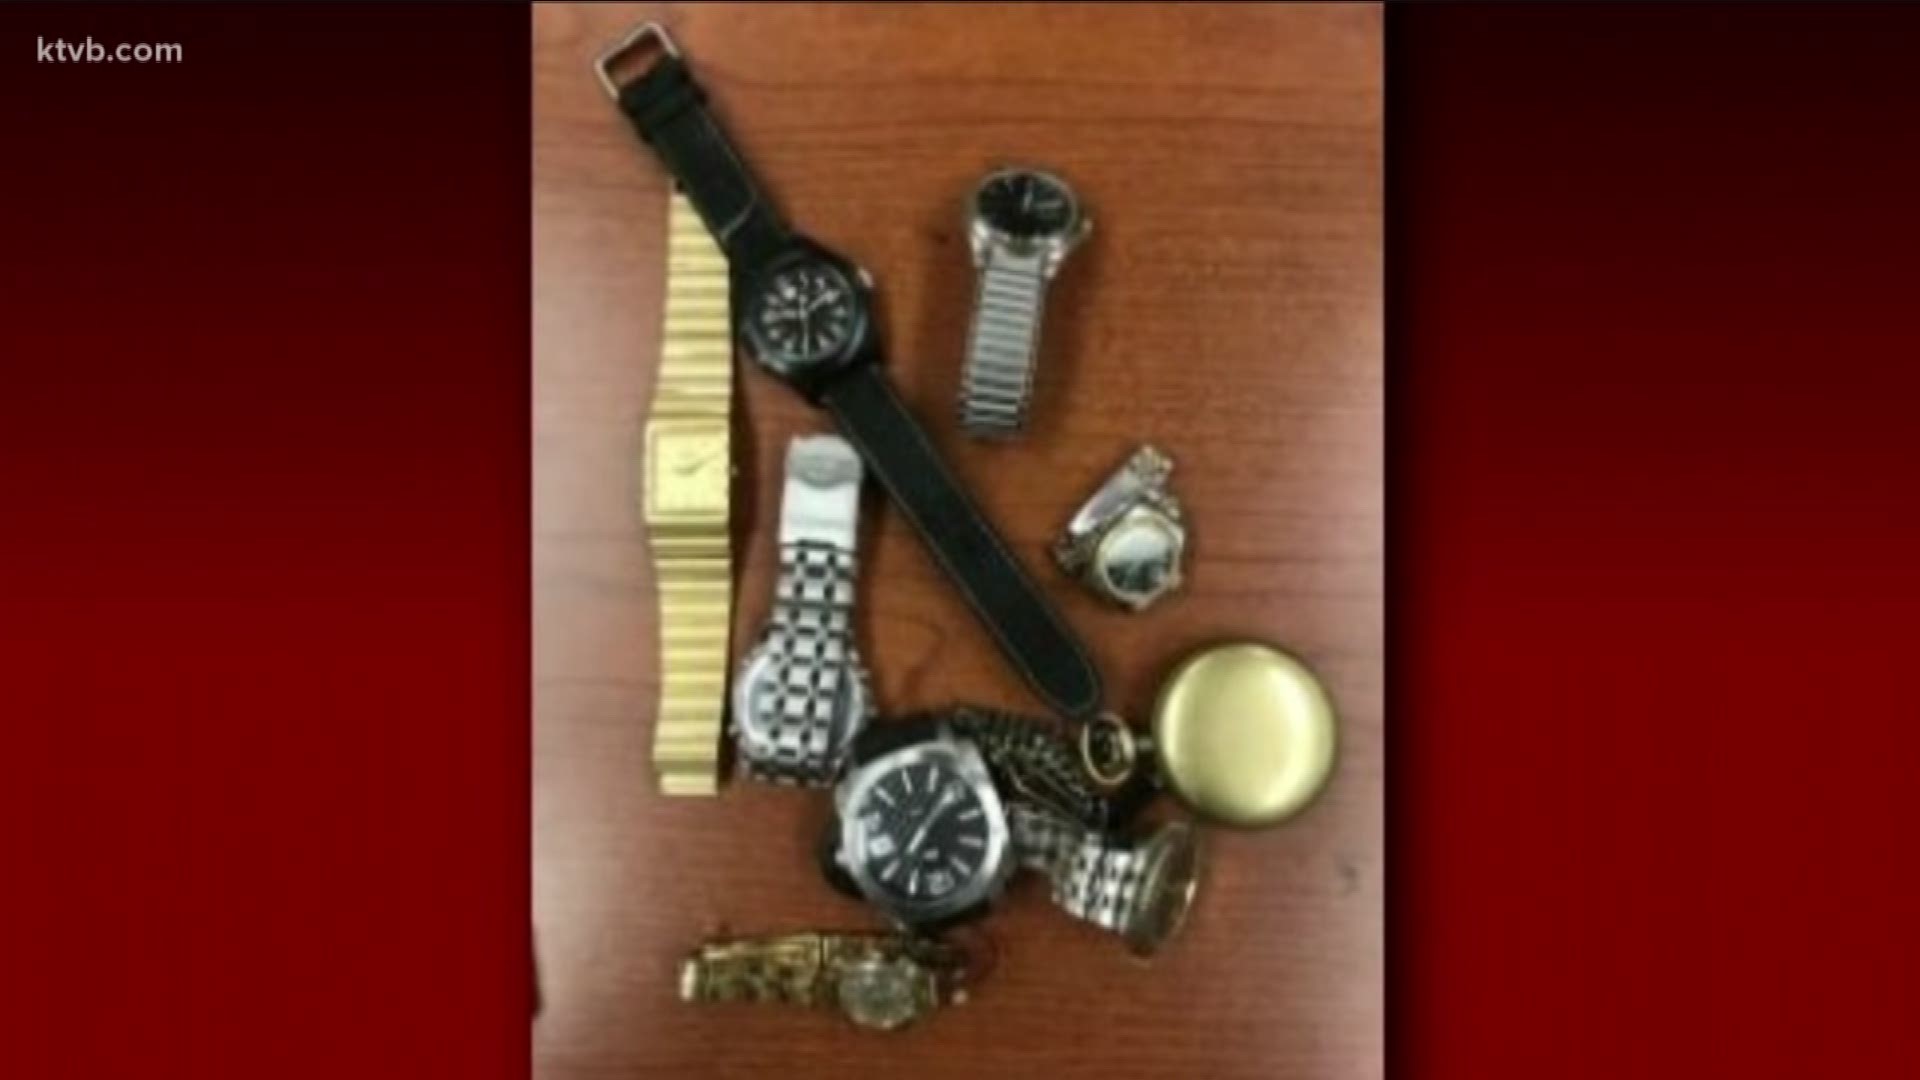 After police arrested a suspect in connection to a burglary, they quickly found dozens of stolen items in his home.